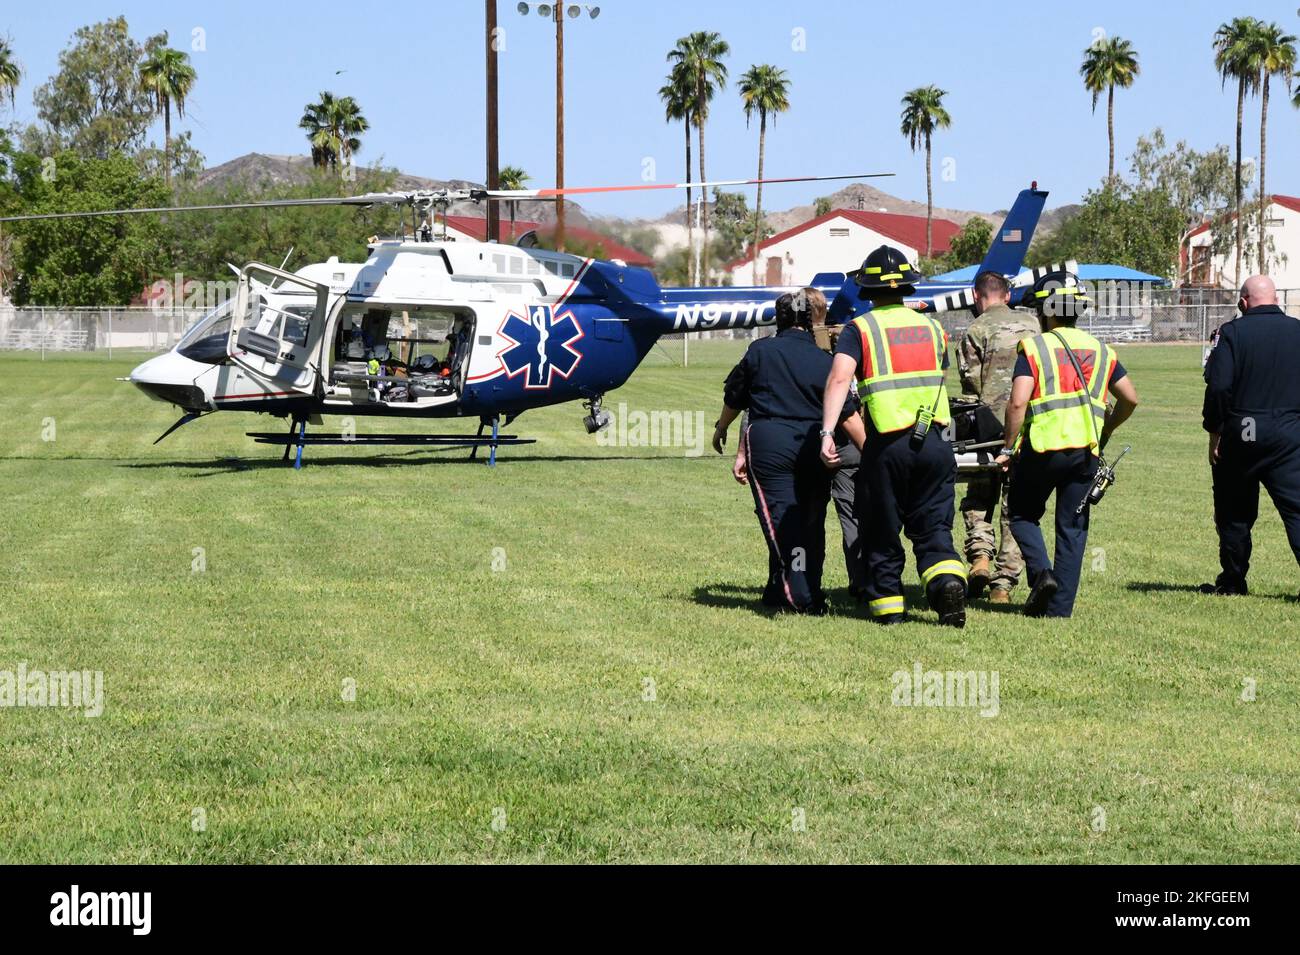 While the Yuma Proving Ground (YPG) Police Department blocked off street access, CareFlight flew on to Cox Field to transport the patient to the hospital. CareFlight is not part of the installation yet responds to the call at YPG. Stock Photo